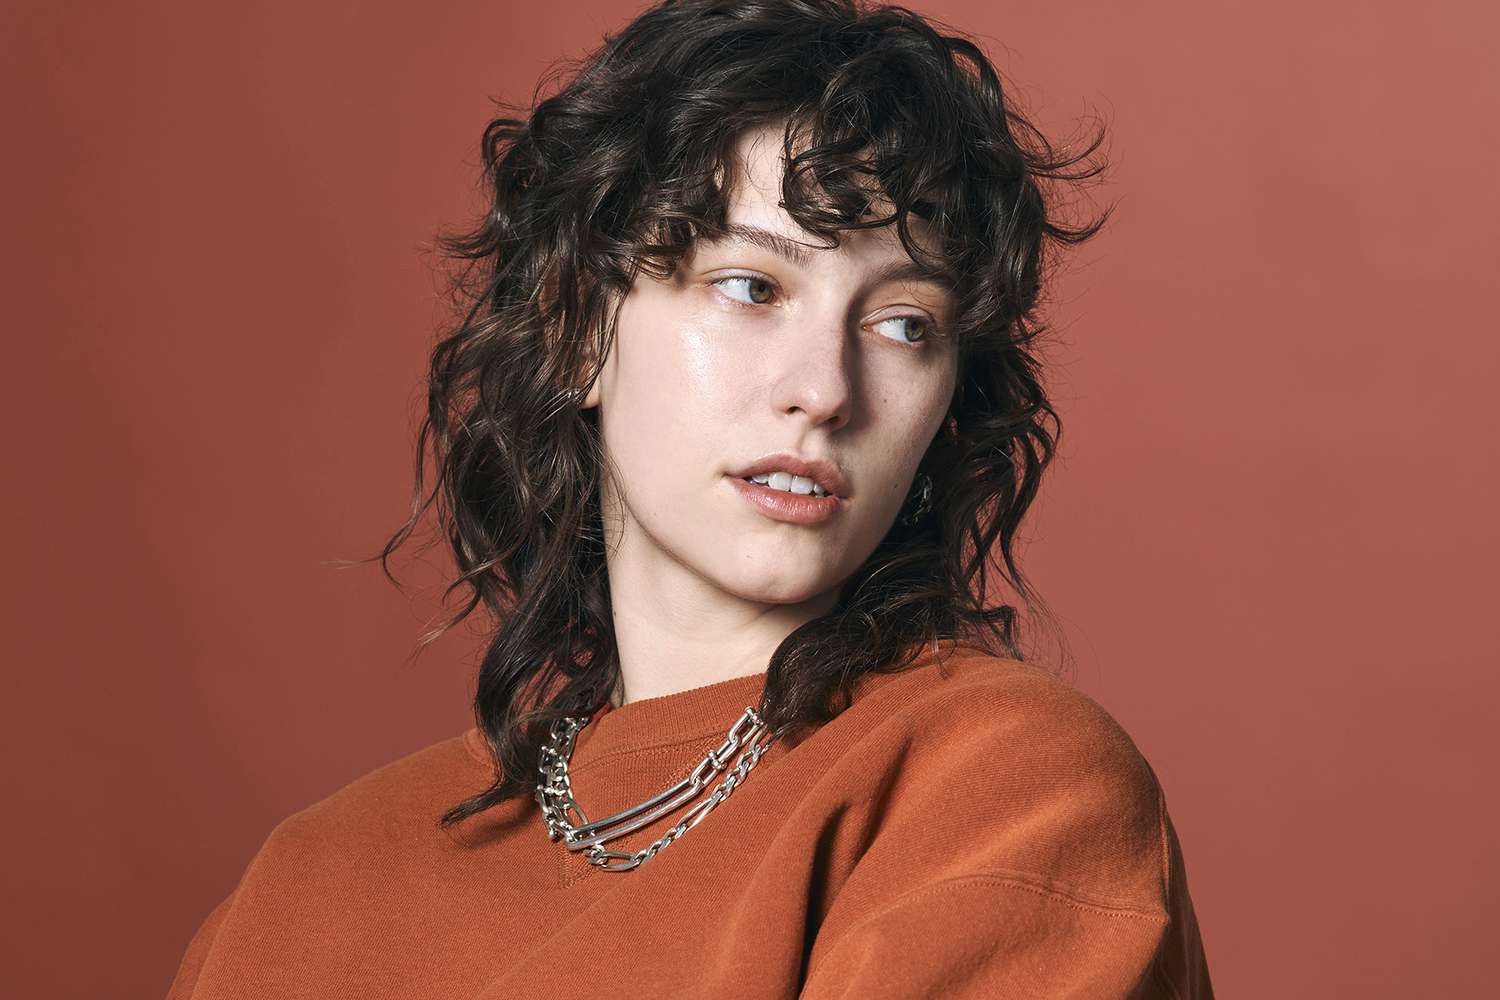 KING PRINCESS UNVEILS NEW SONG “CHANGE THE LOCKS” NEW ALBUM HOLD ON BABY OUT JULY 29 https://sacksco.com/pr/king_princess.html